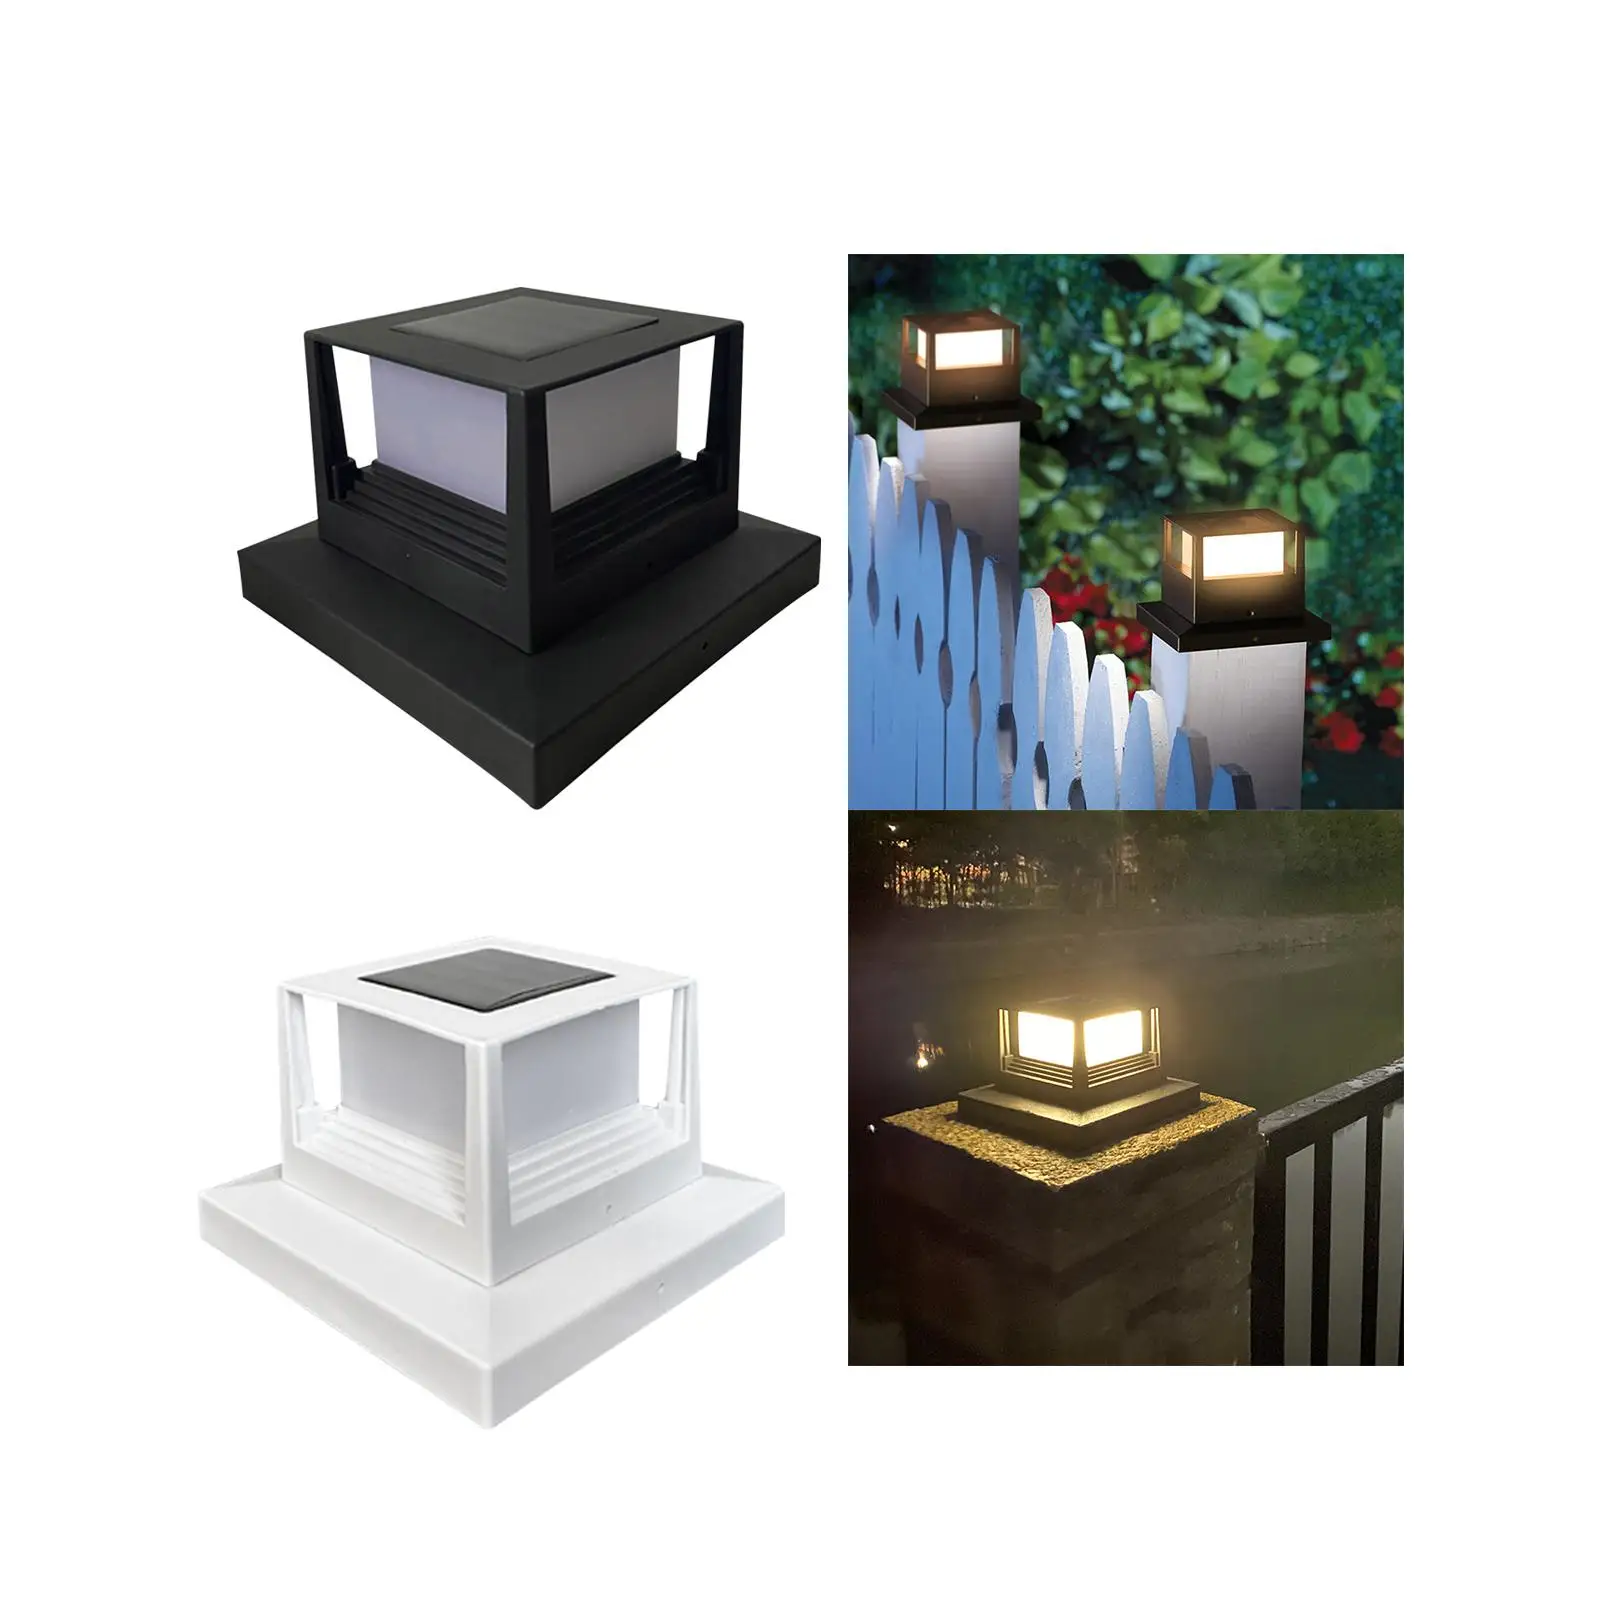 Solar Post  Outdoor IP44 Waterproof Fit 4x4 5x5 6x6 Wooden Posts Outside Light for Pathway Garden Courtyard Stairs